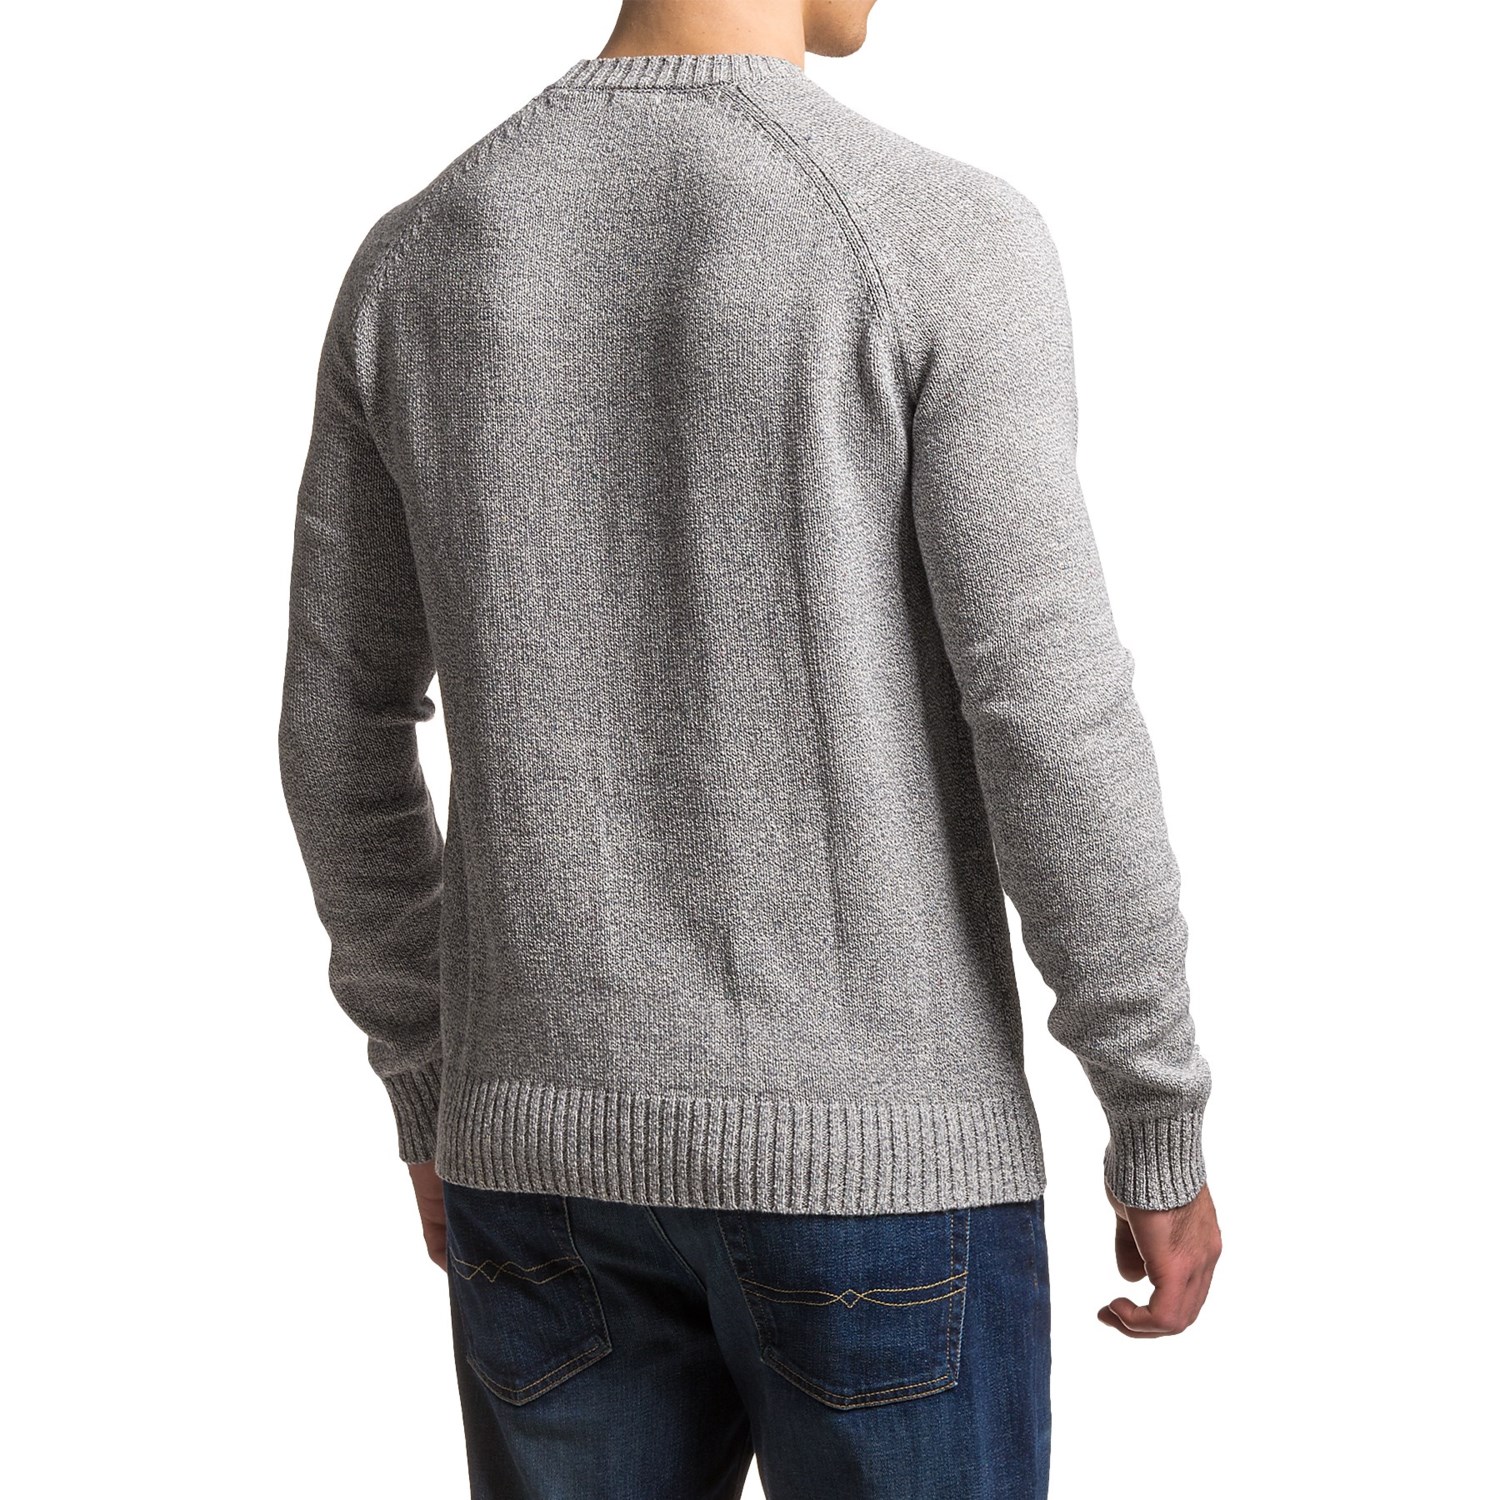 Gramicci Chopping Wood Sweater (For Men) - Save 62%